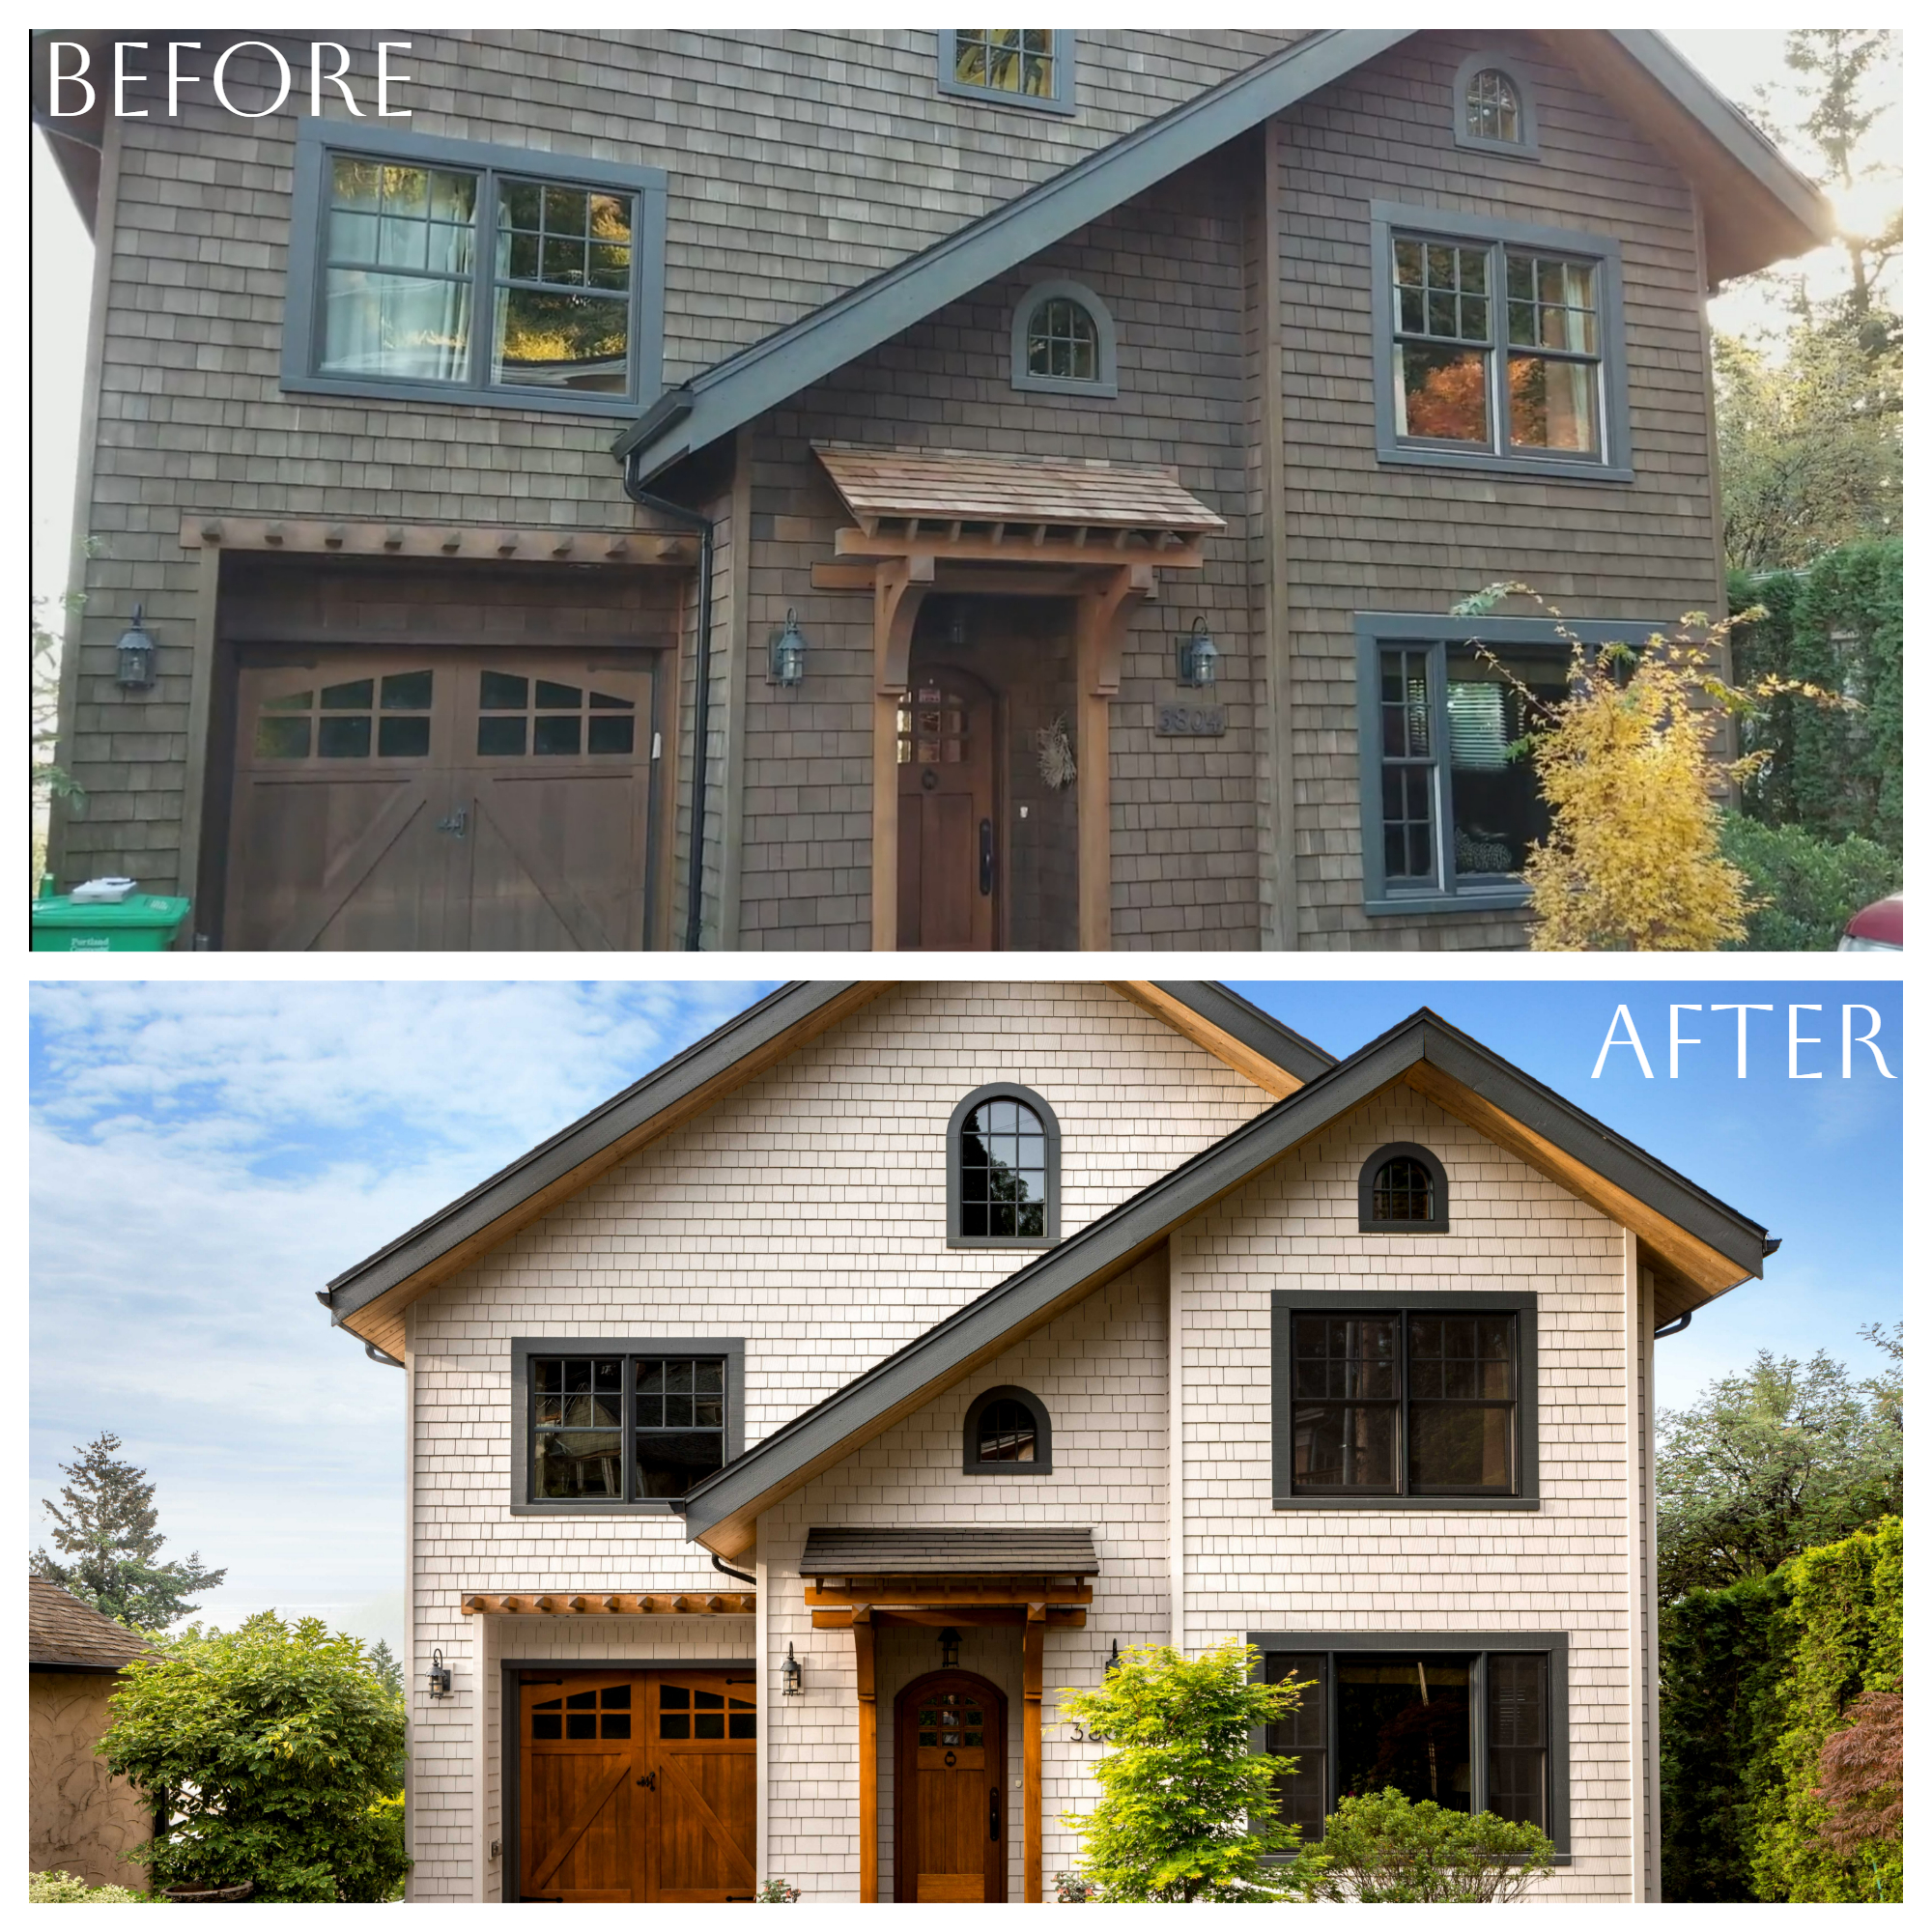 An Outdoor Oasis - A before and after photo of a house transformed into an enchanting retreat, with a captivating splash of paint adding to its indoor elegance.